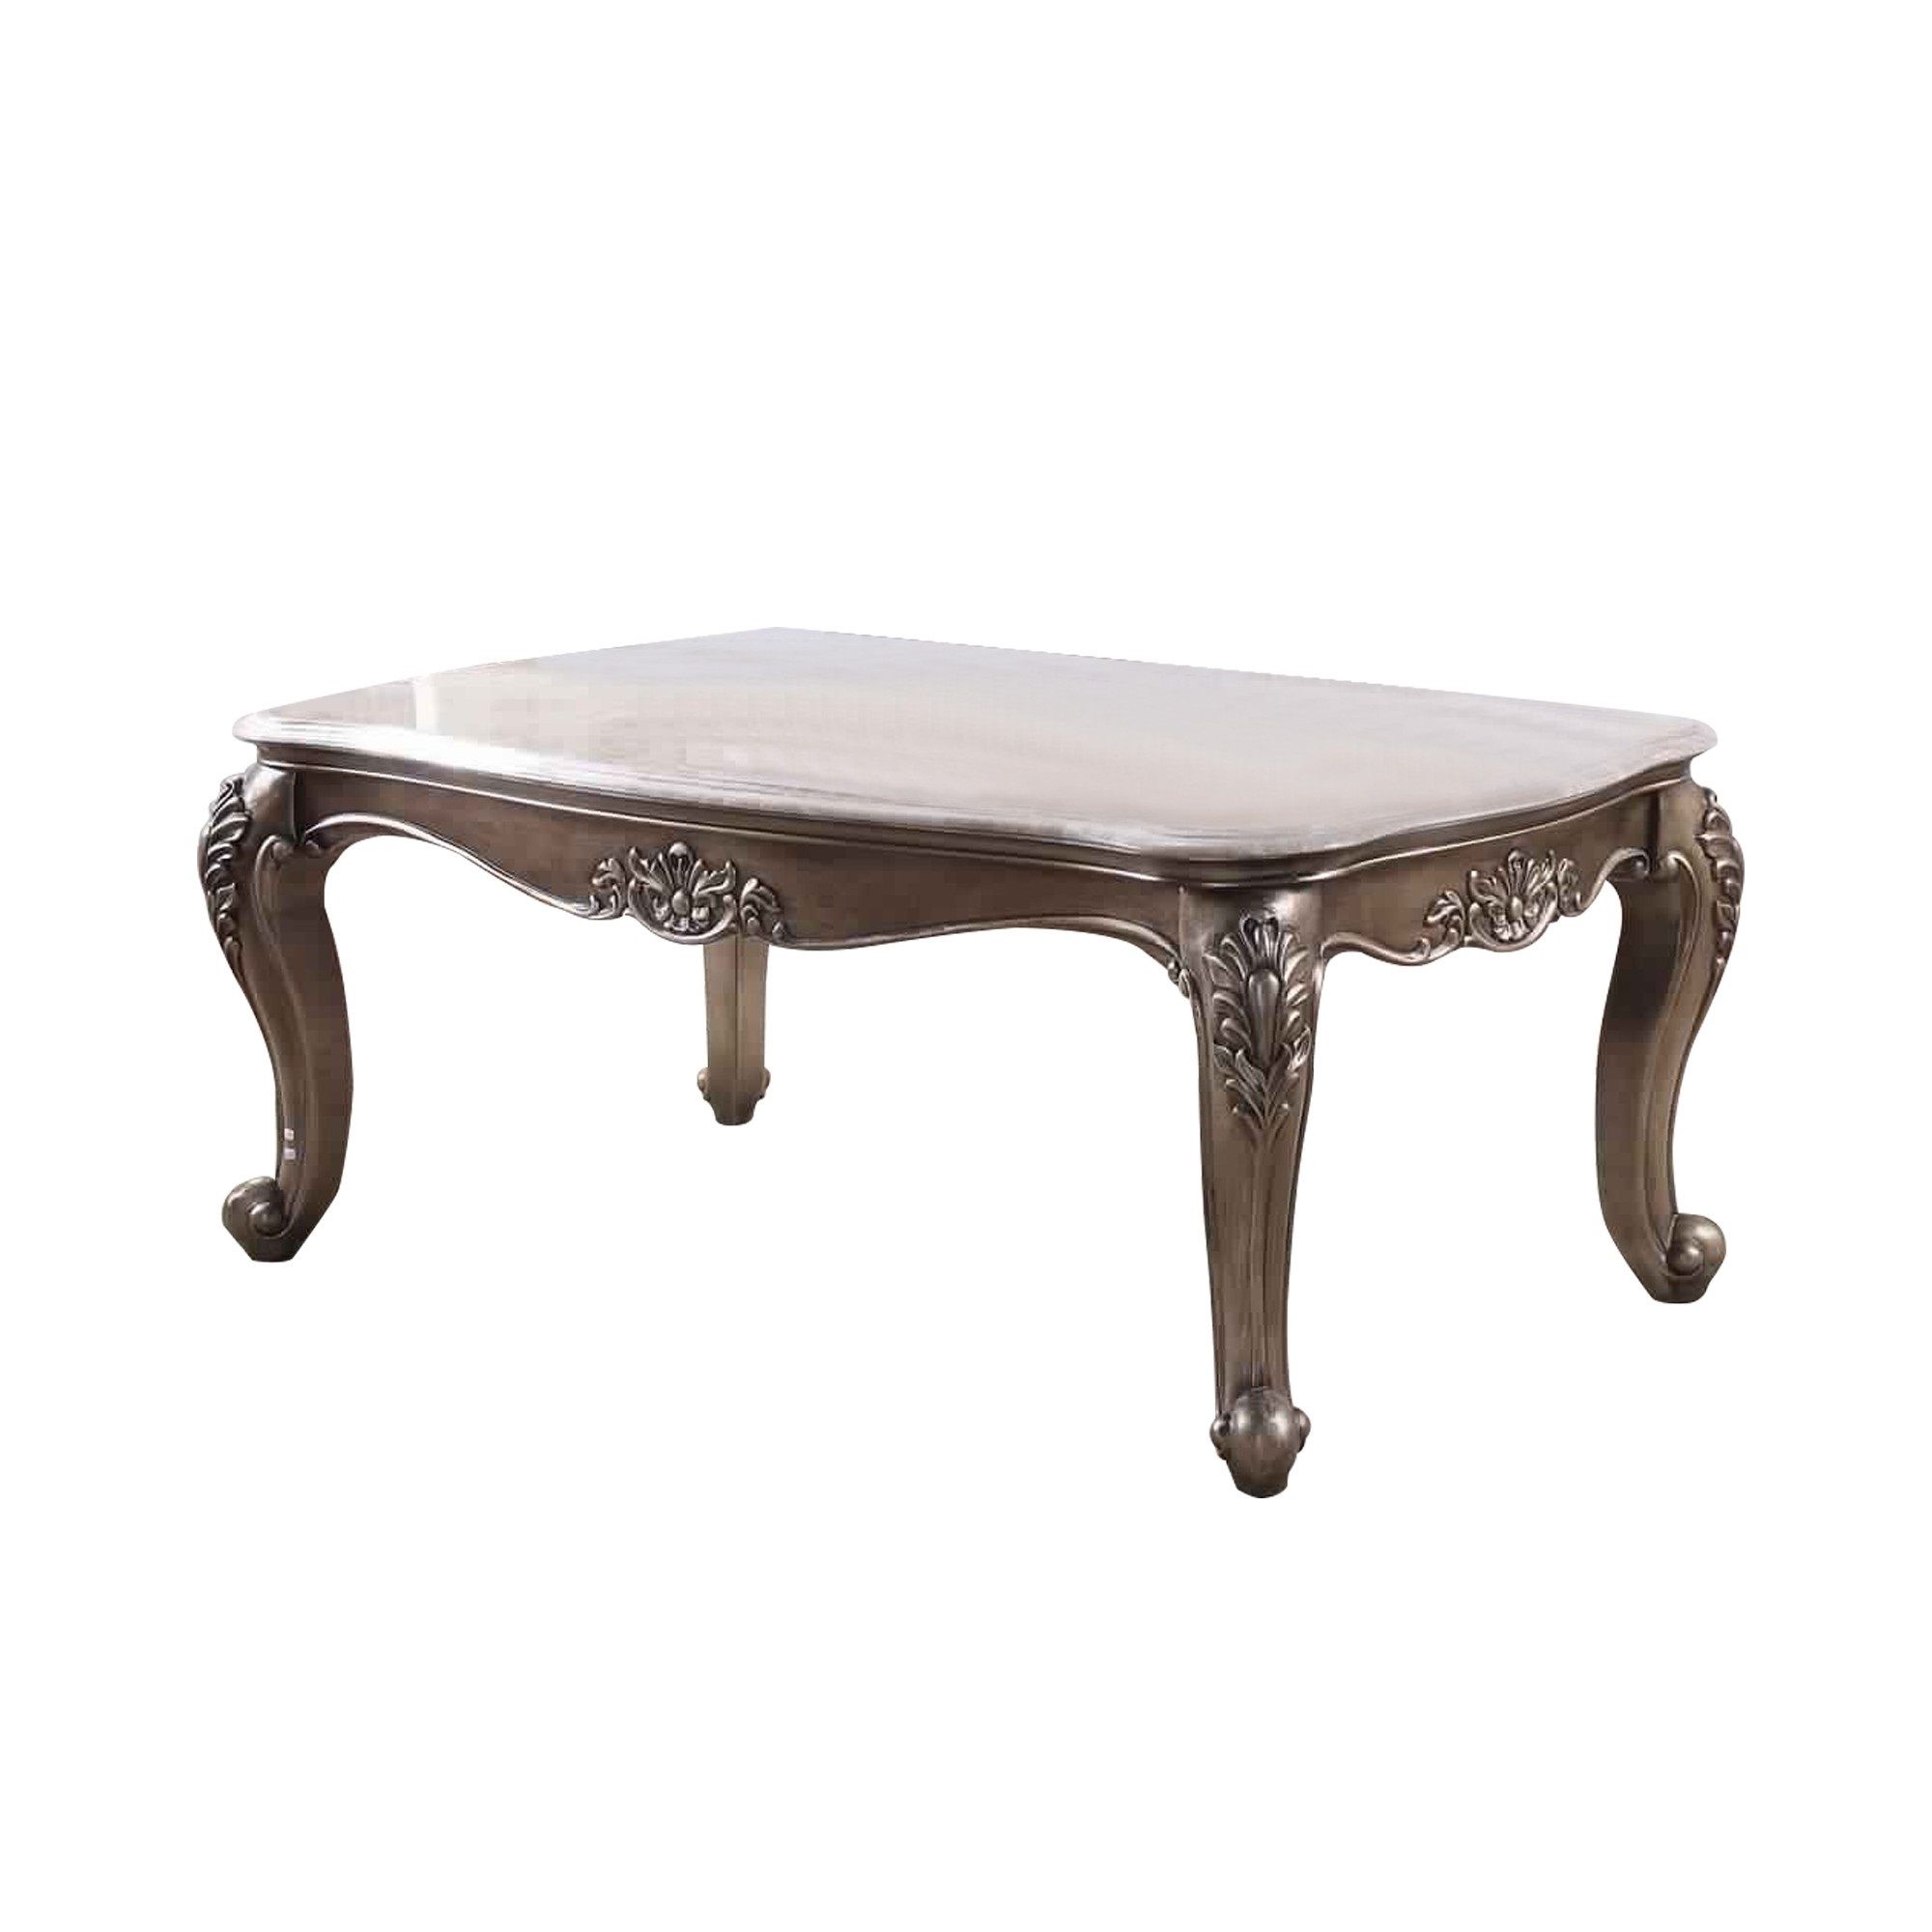 Faux Marble Top Engraved Wooden Frame Coffee Table, Off With Faux White Marble And Metal Coffee Tables (View 6 of 15)